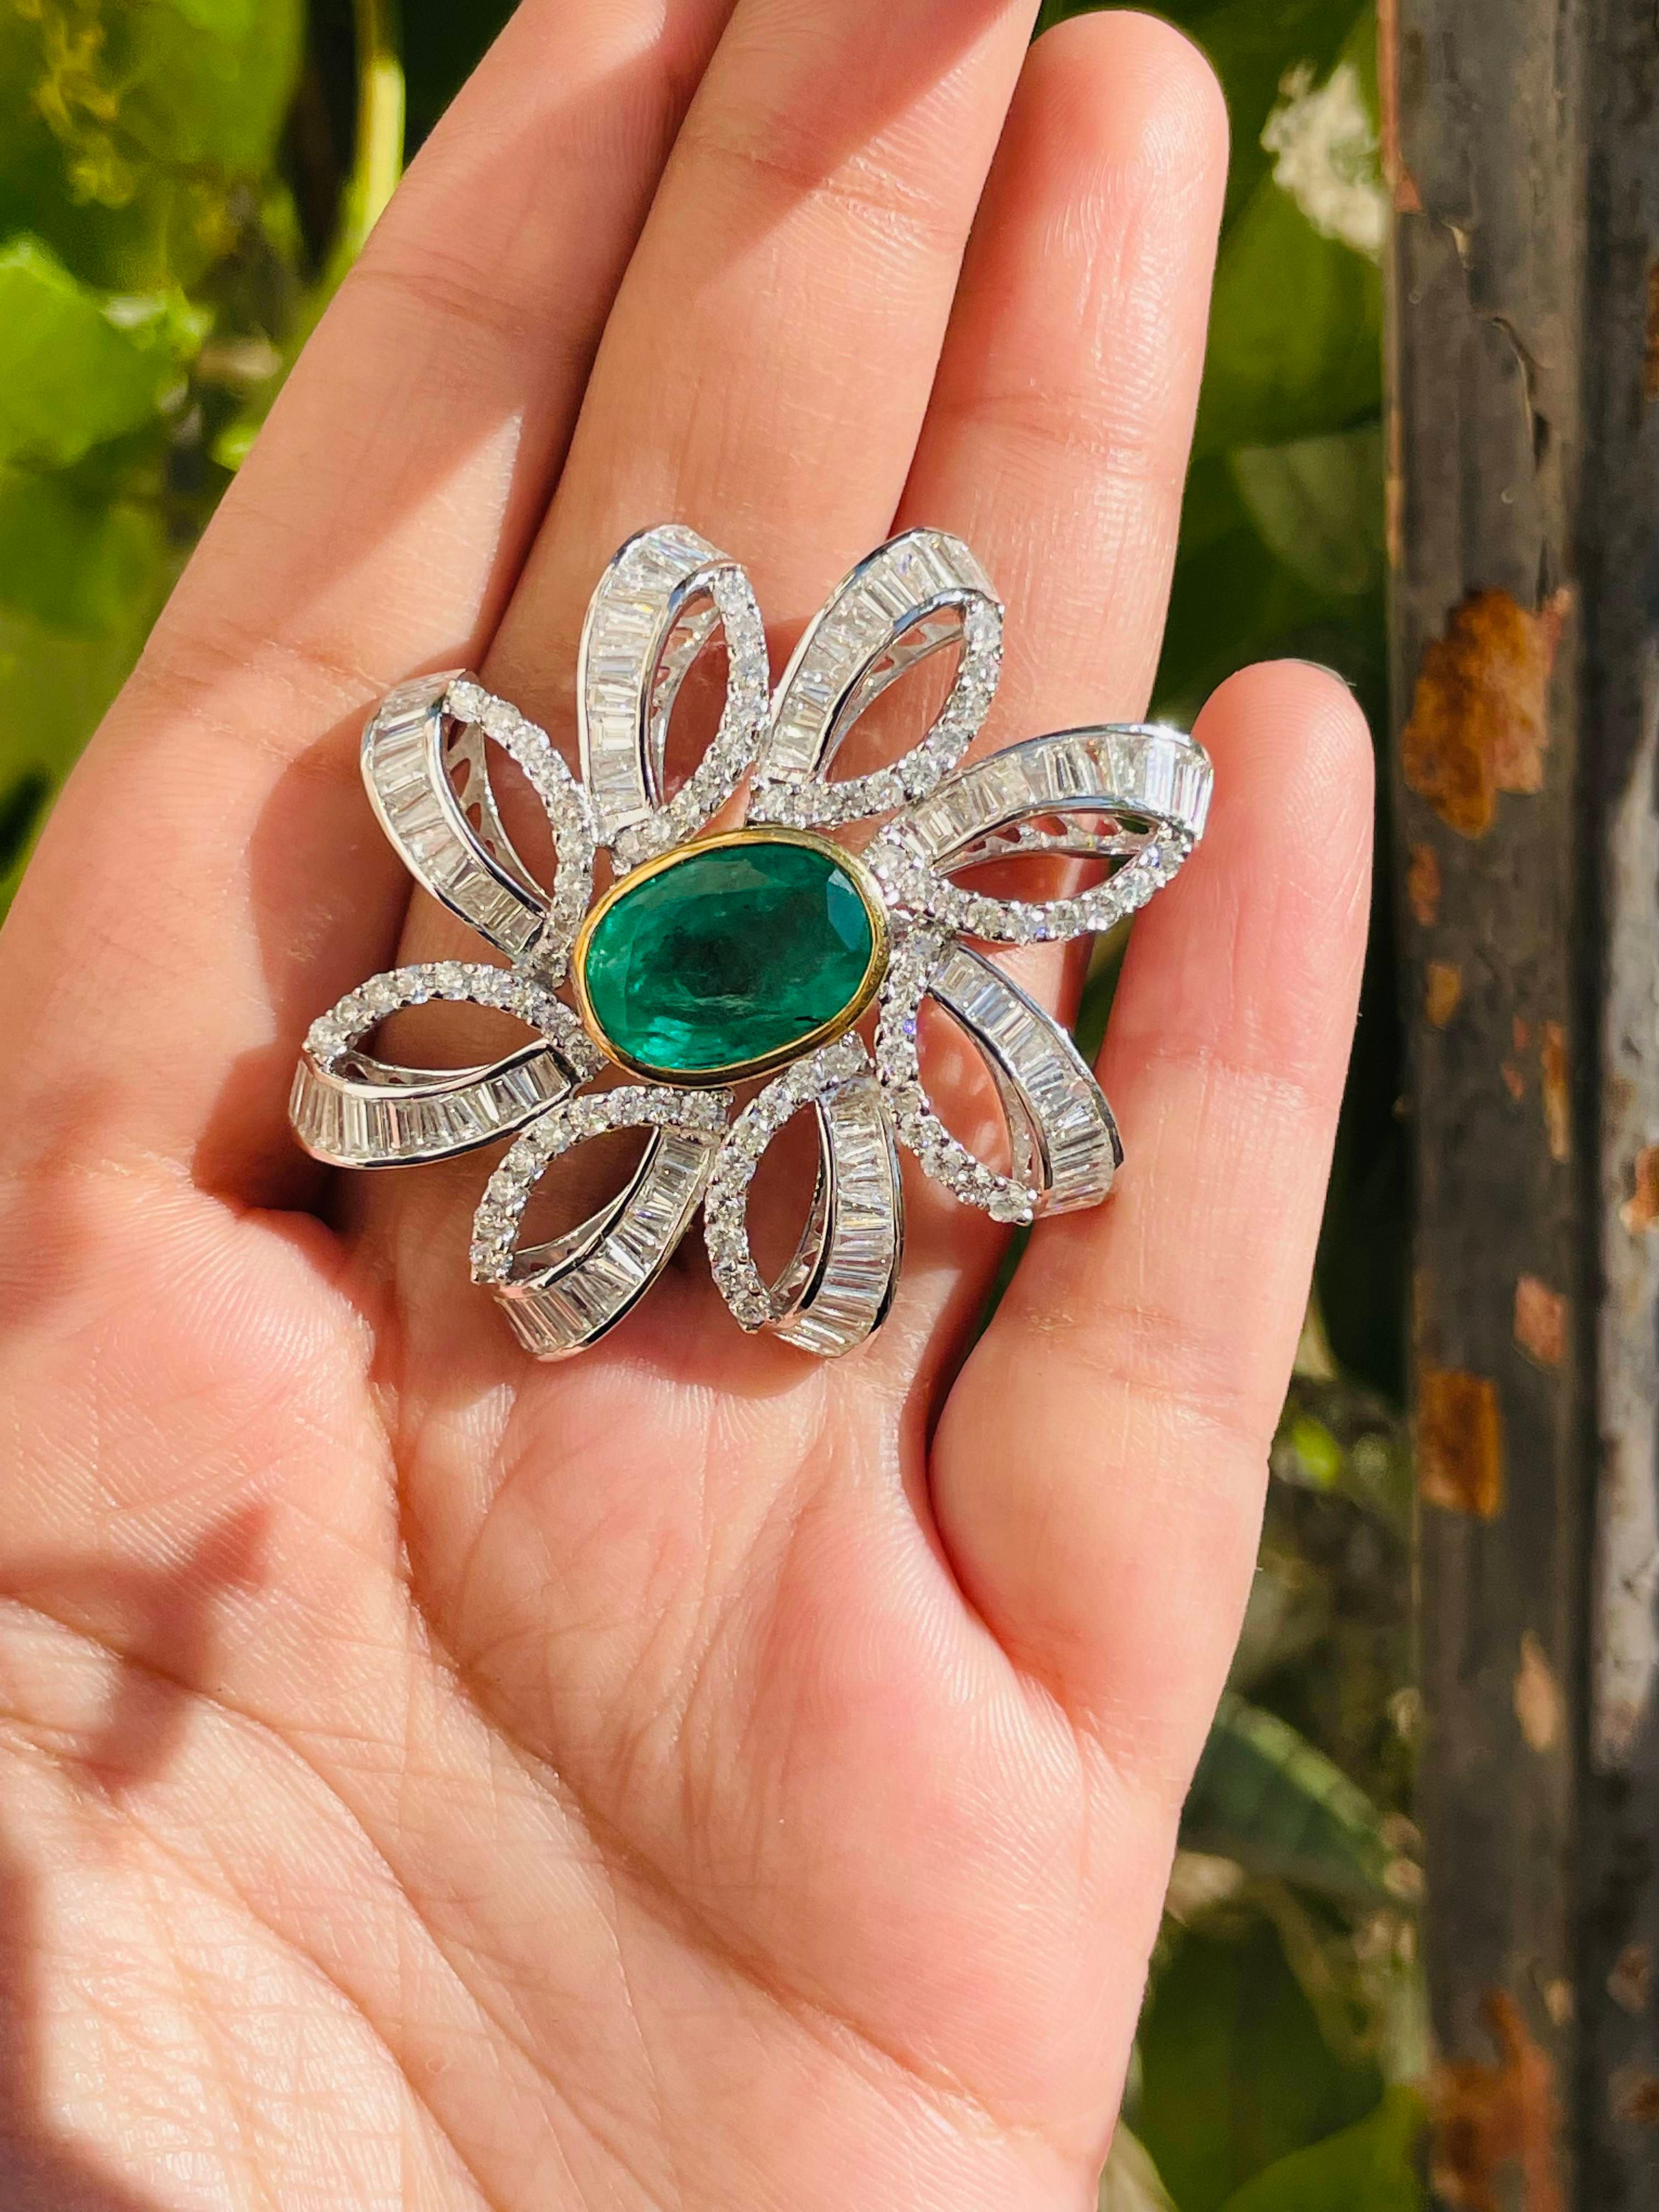  18k Solid White Gold Diamond and 7.5 Carats Emerald Blooming Floral Brooch For Sale 2